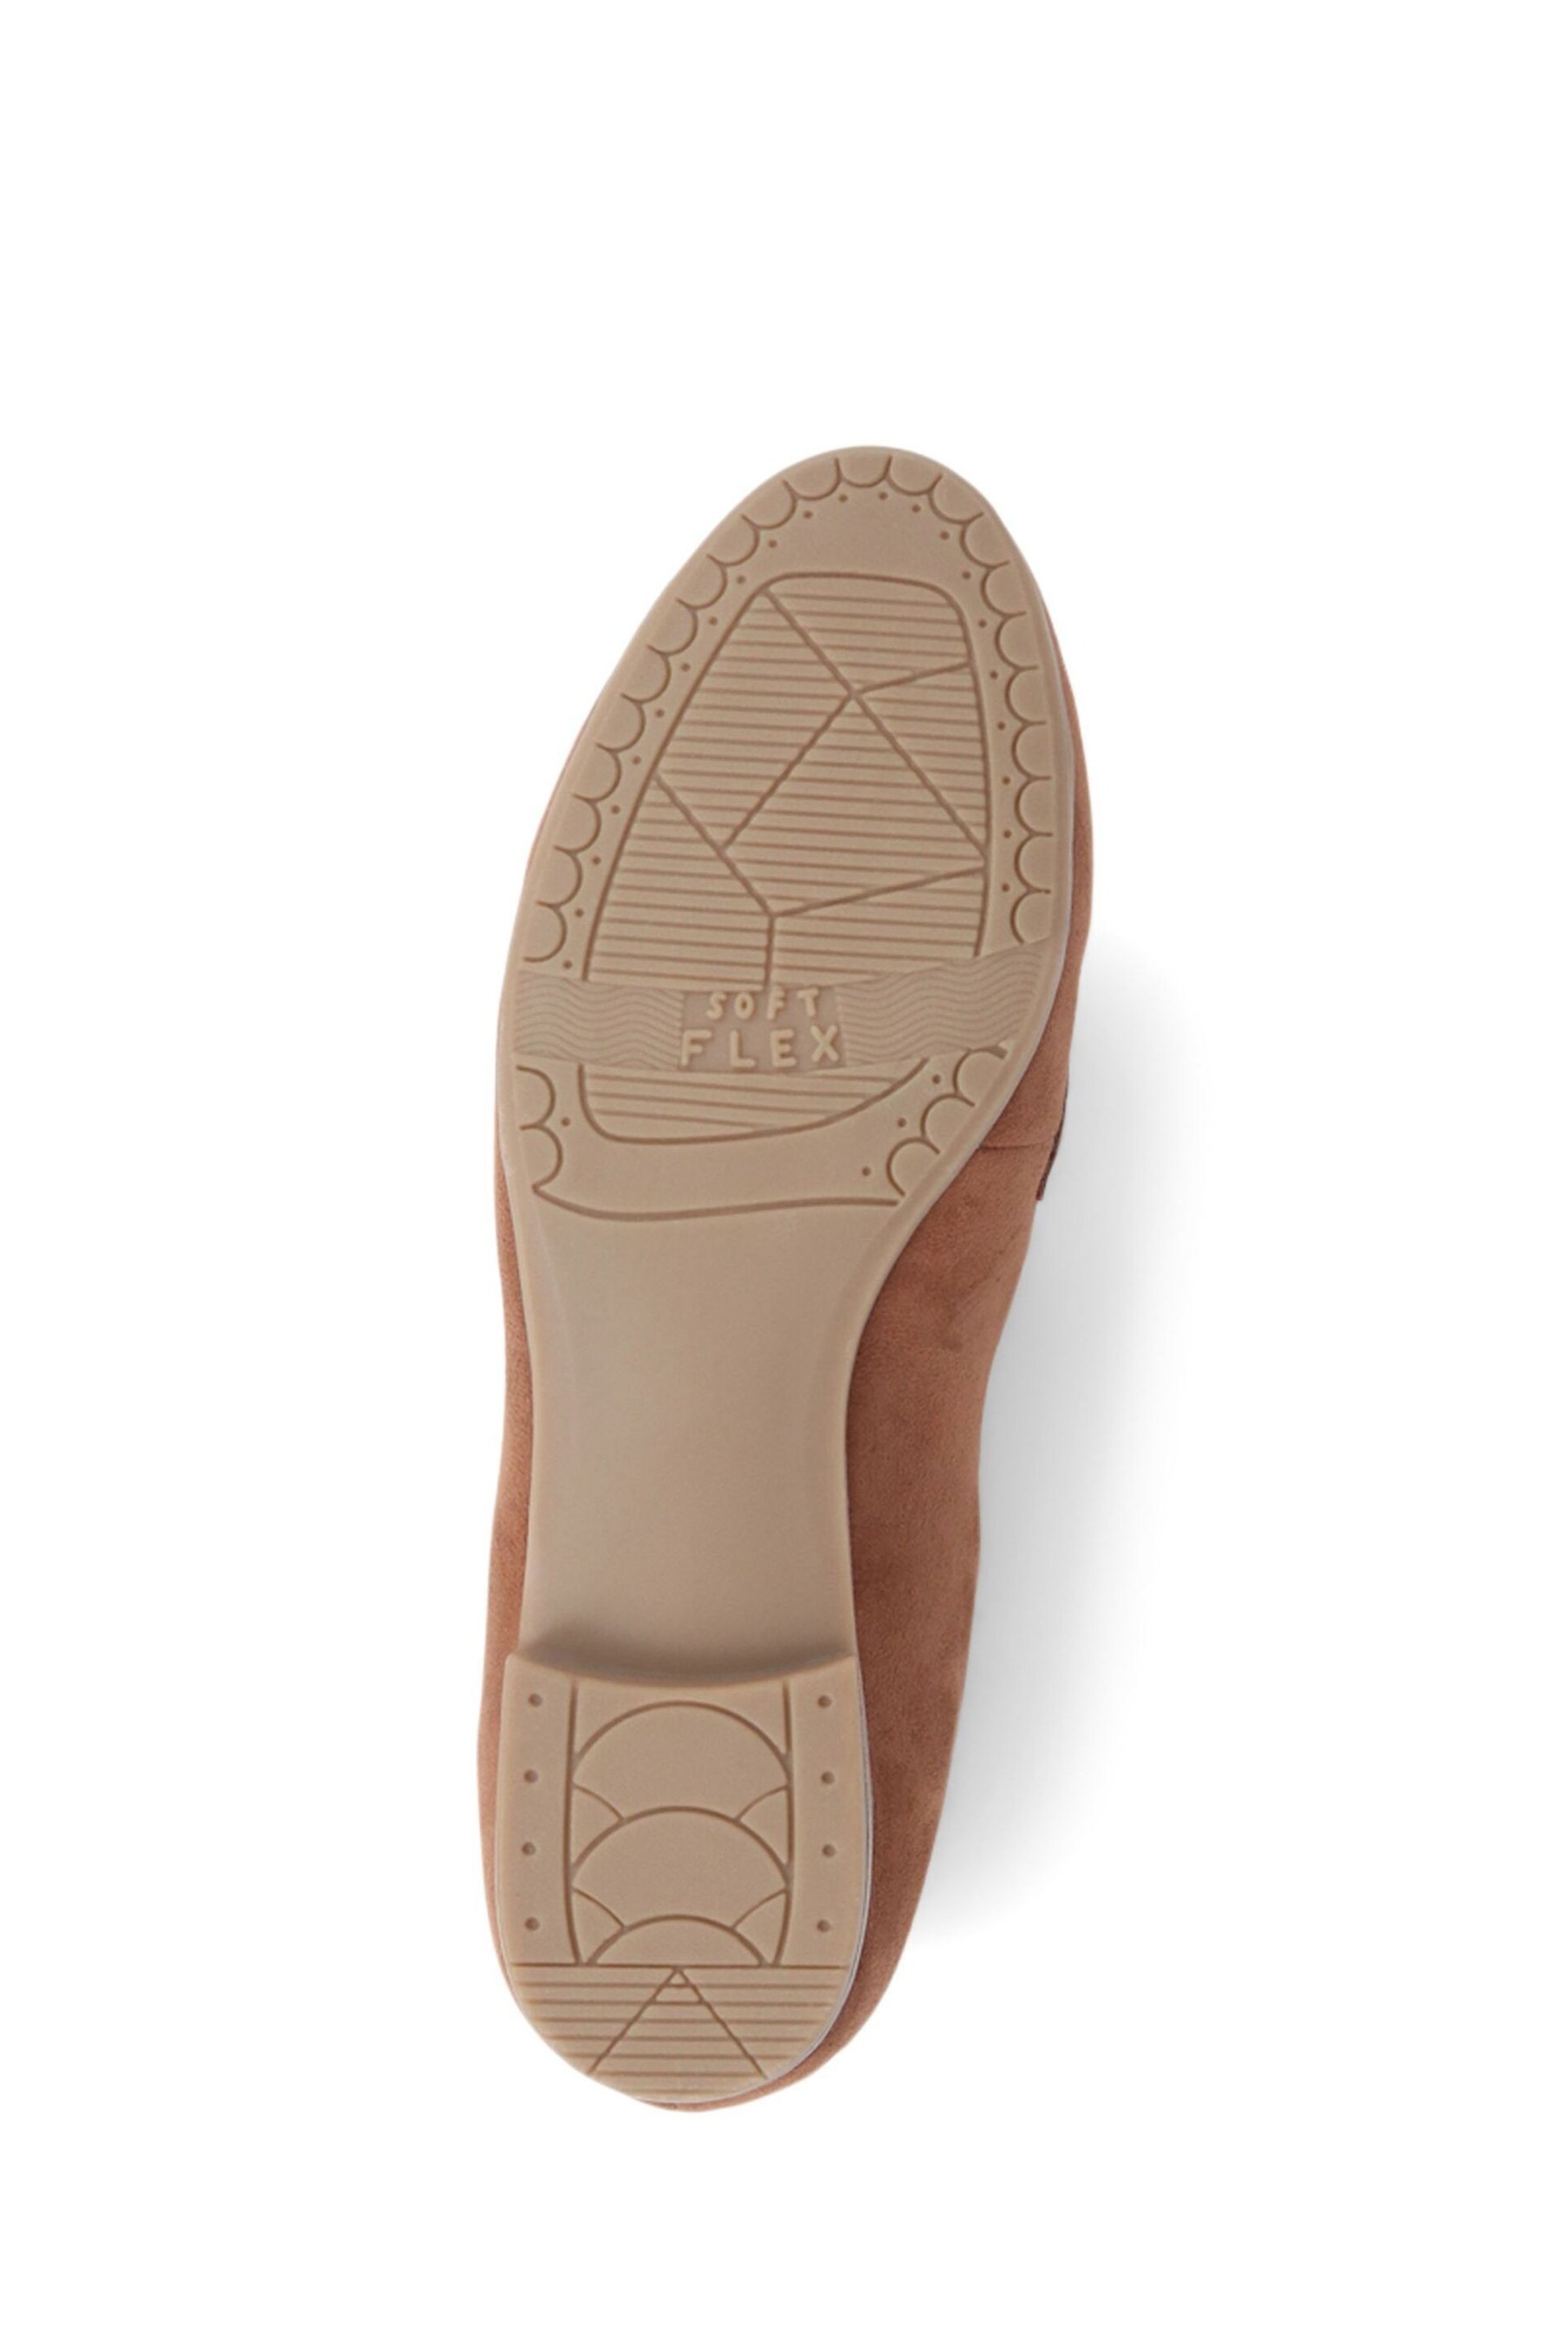 Pavers Smart Slip On Loafers - Image 5 of 5